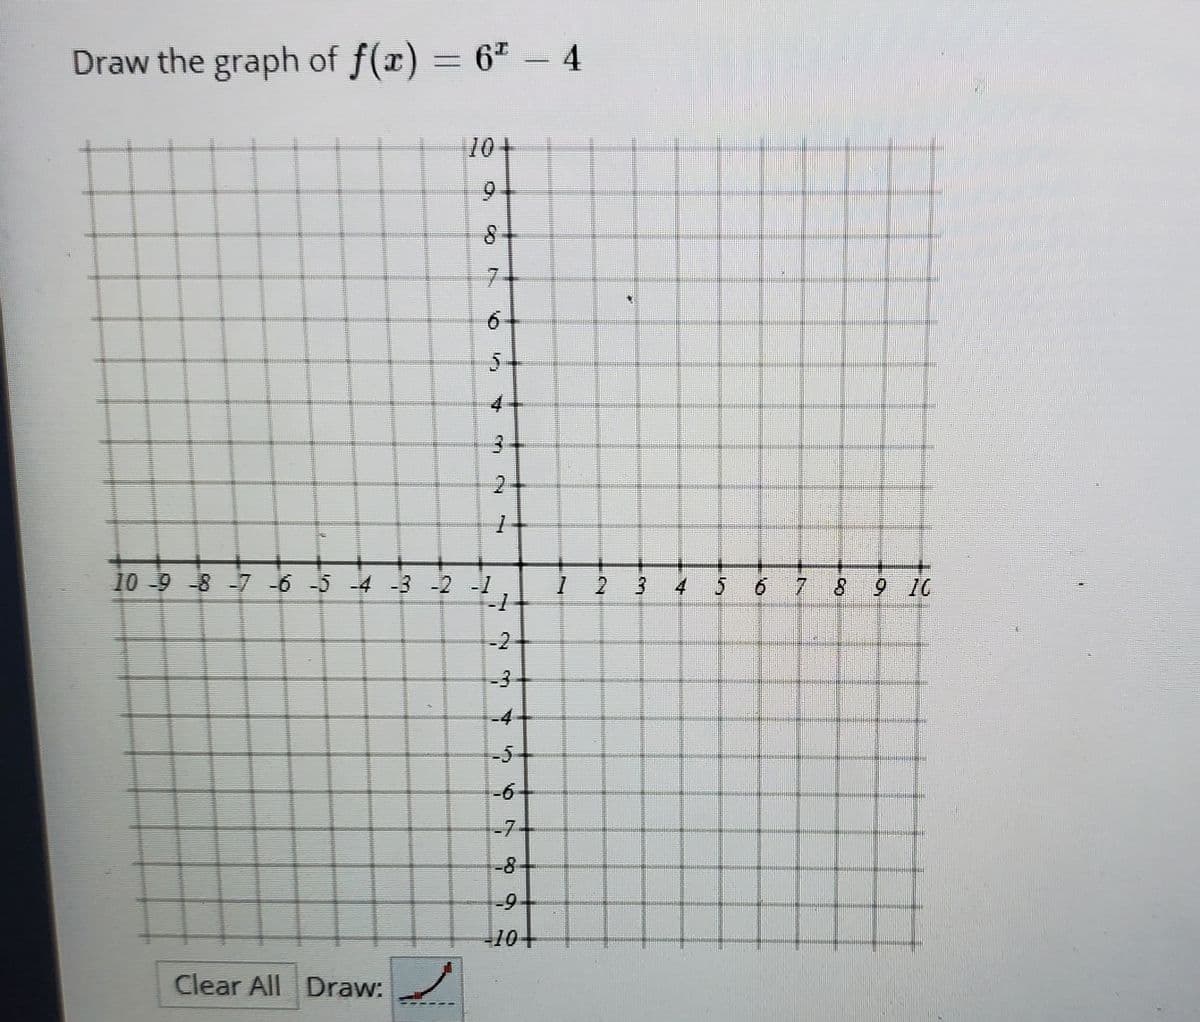 Draw the graph of f(x) = 6" - 4
10+
6.
8-
7.
6
4.
10 -9 8-7 6-5-4 -3 -2 -1
1 2 3 4
5 6 7 8 9 10
-2
-3
-4
-5-
-6-
-7-
-8-
10+
Clear All Draw:
